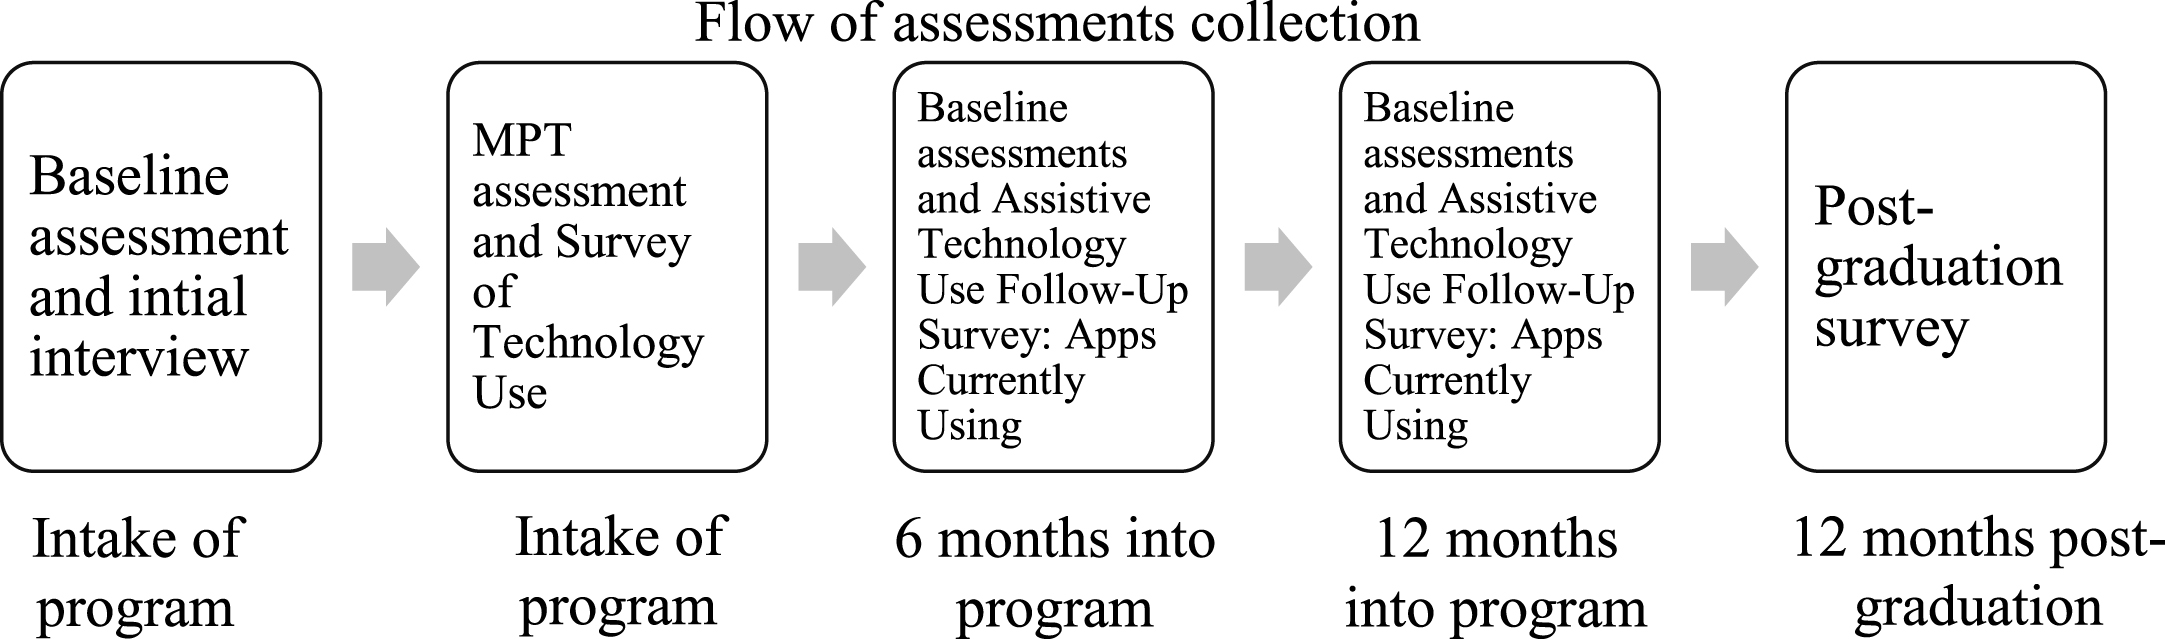 Flow of assessments collection.